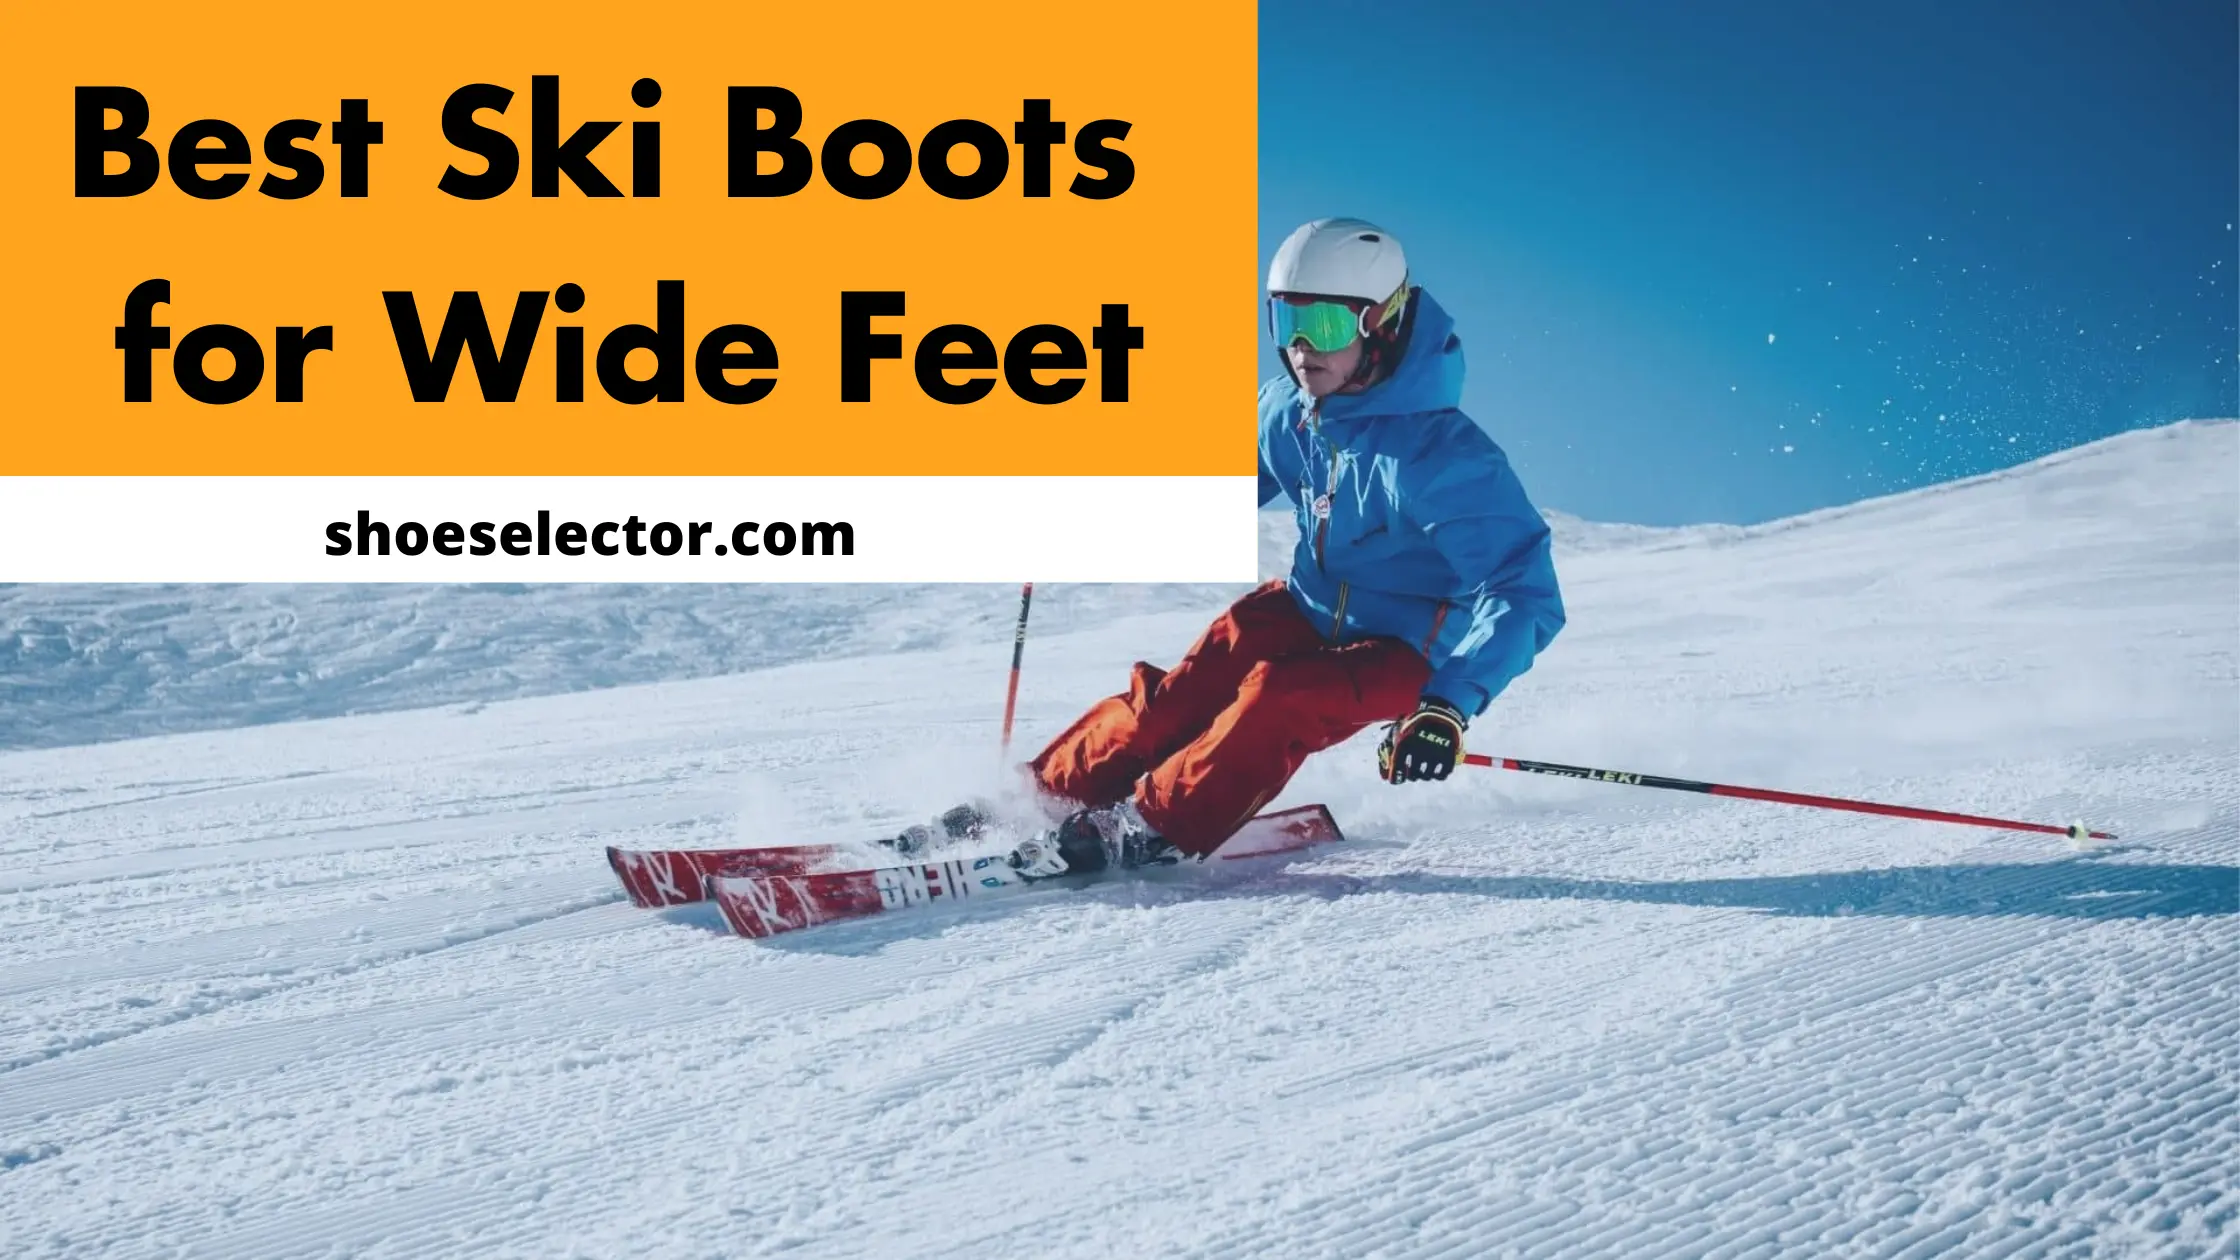 Best Ski Boots For Wide Feet - Recommended Guide